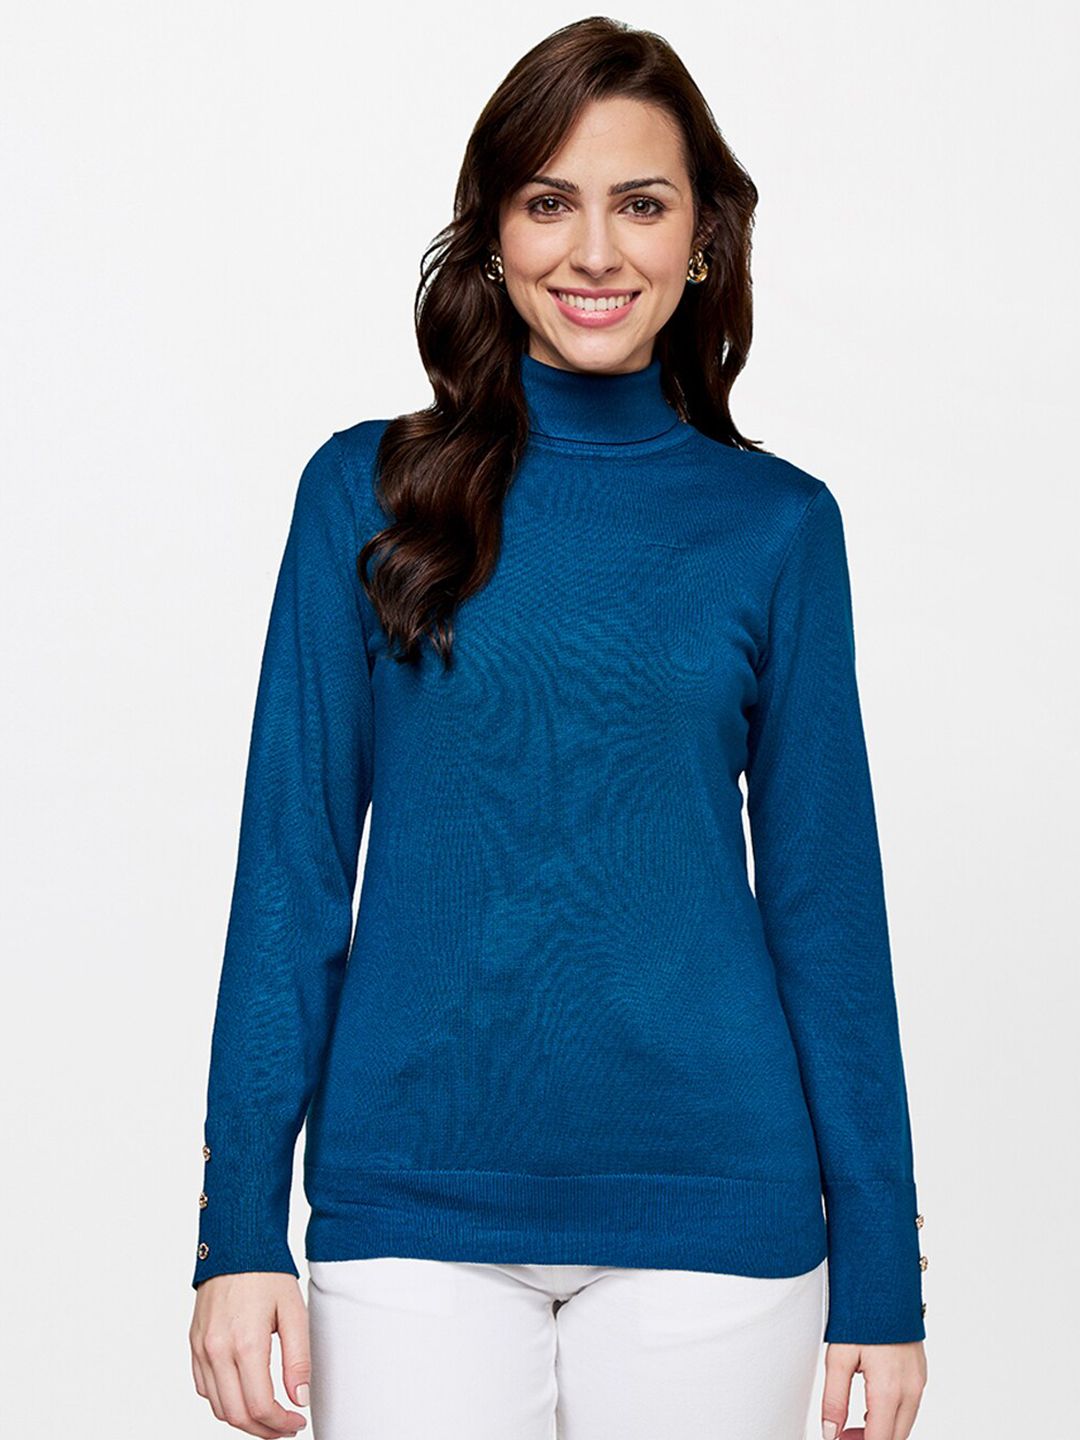 AND Teal Solid Turtle Neck Regular Top Price in India